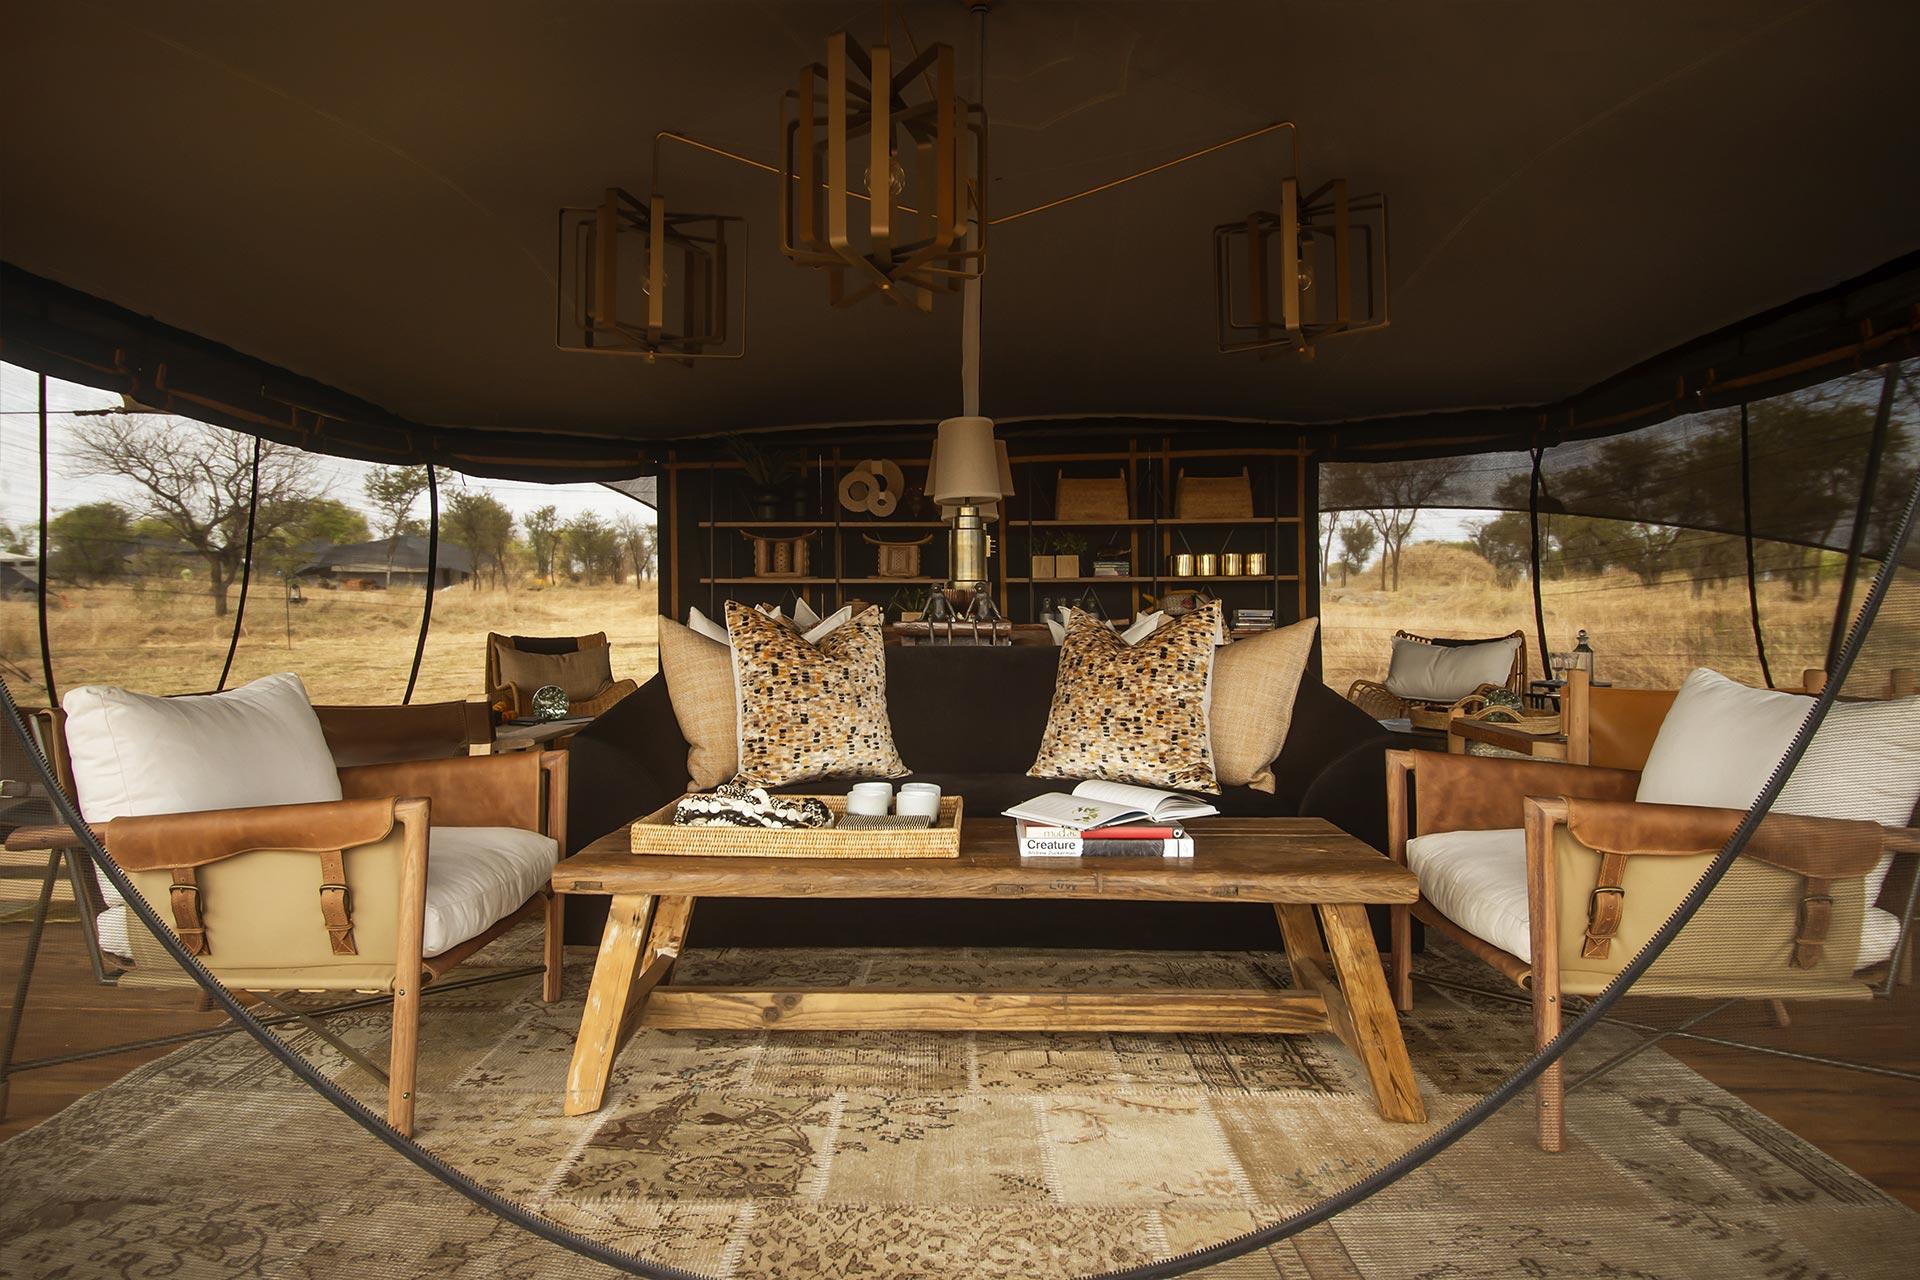 The Siringit Migration Camp has been made in Tanzania using locally sourced and recycled materials. The stretched canvas panels have been cut, handstitched and custom-designed to bring you closer to nature